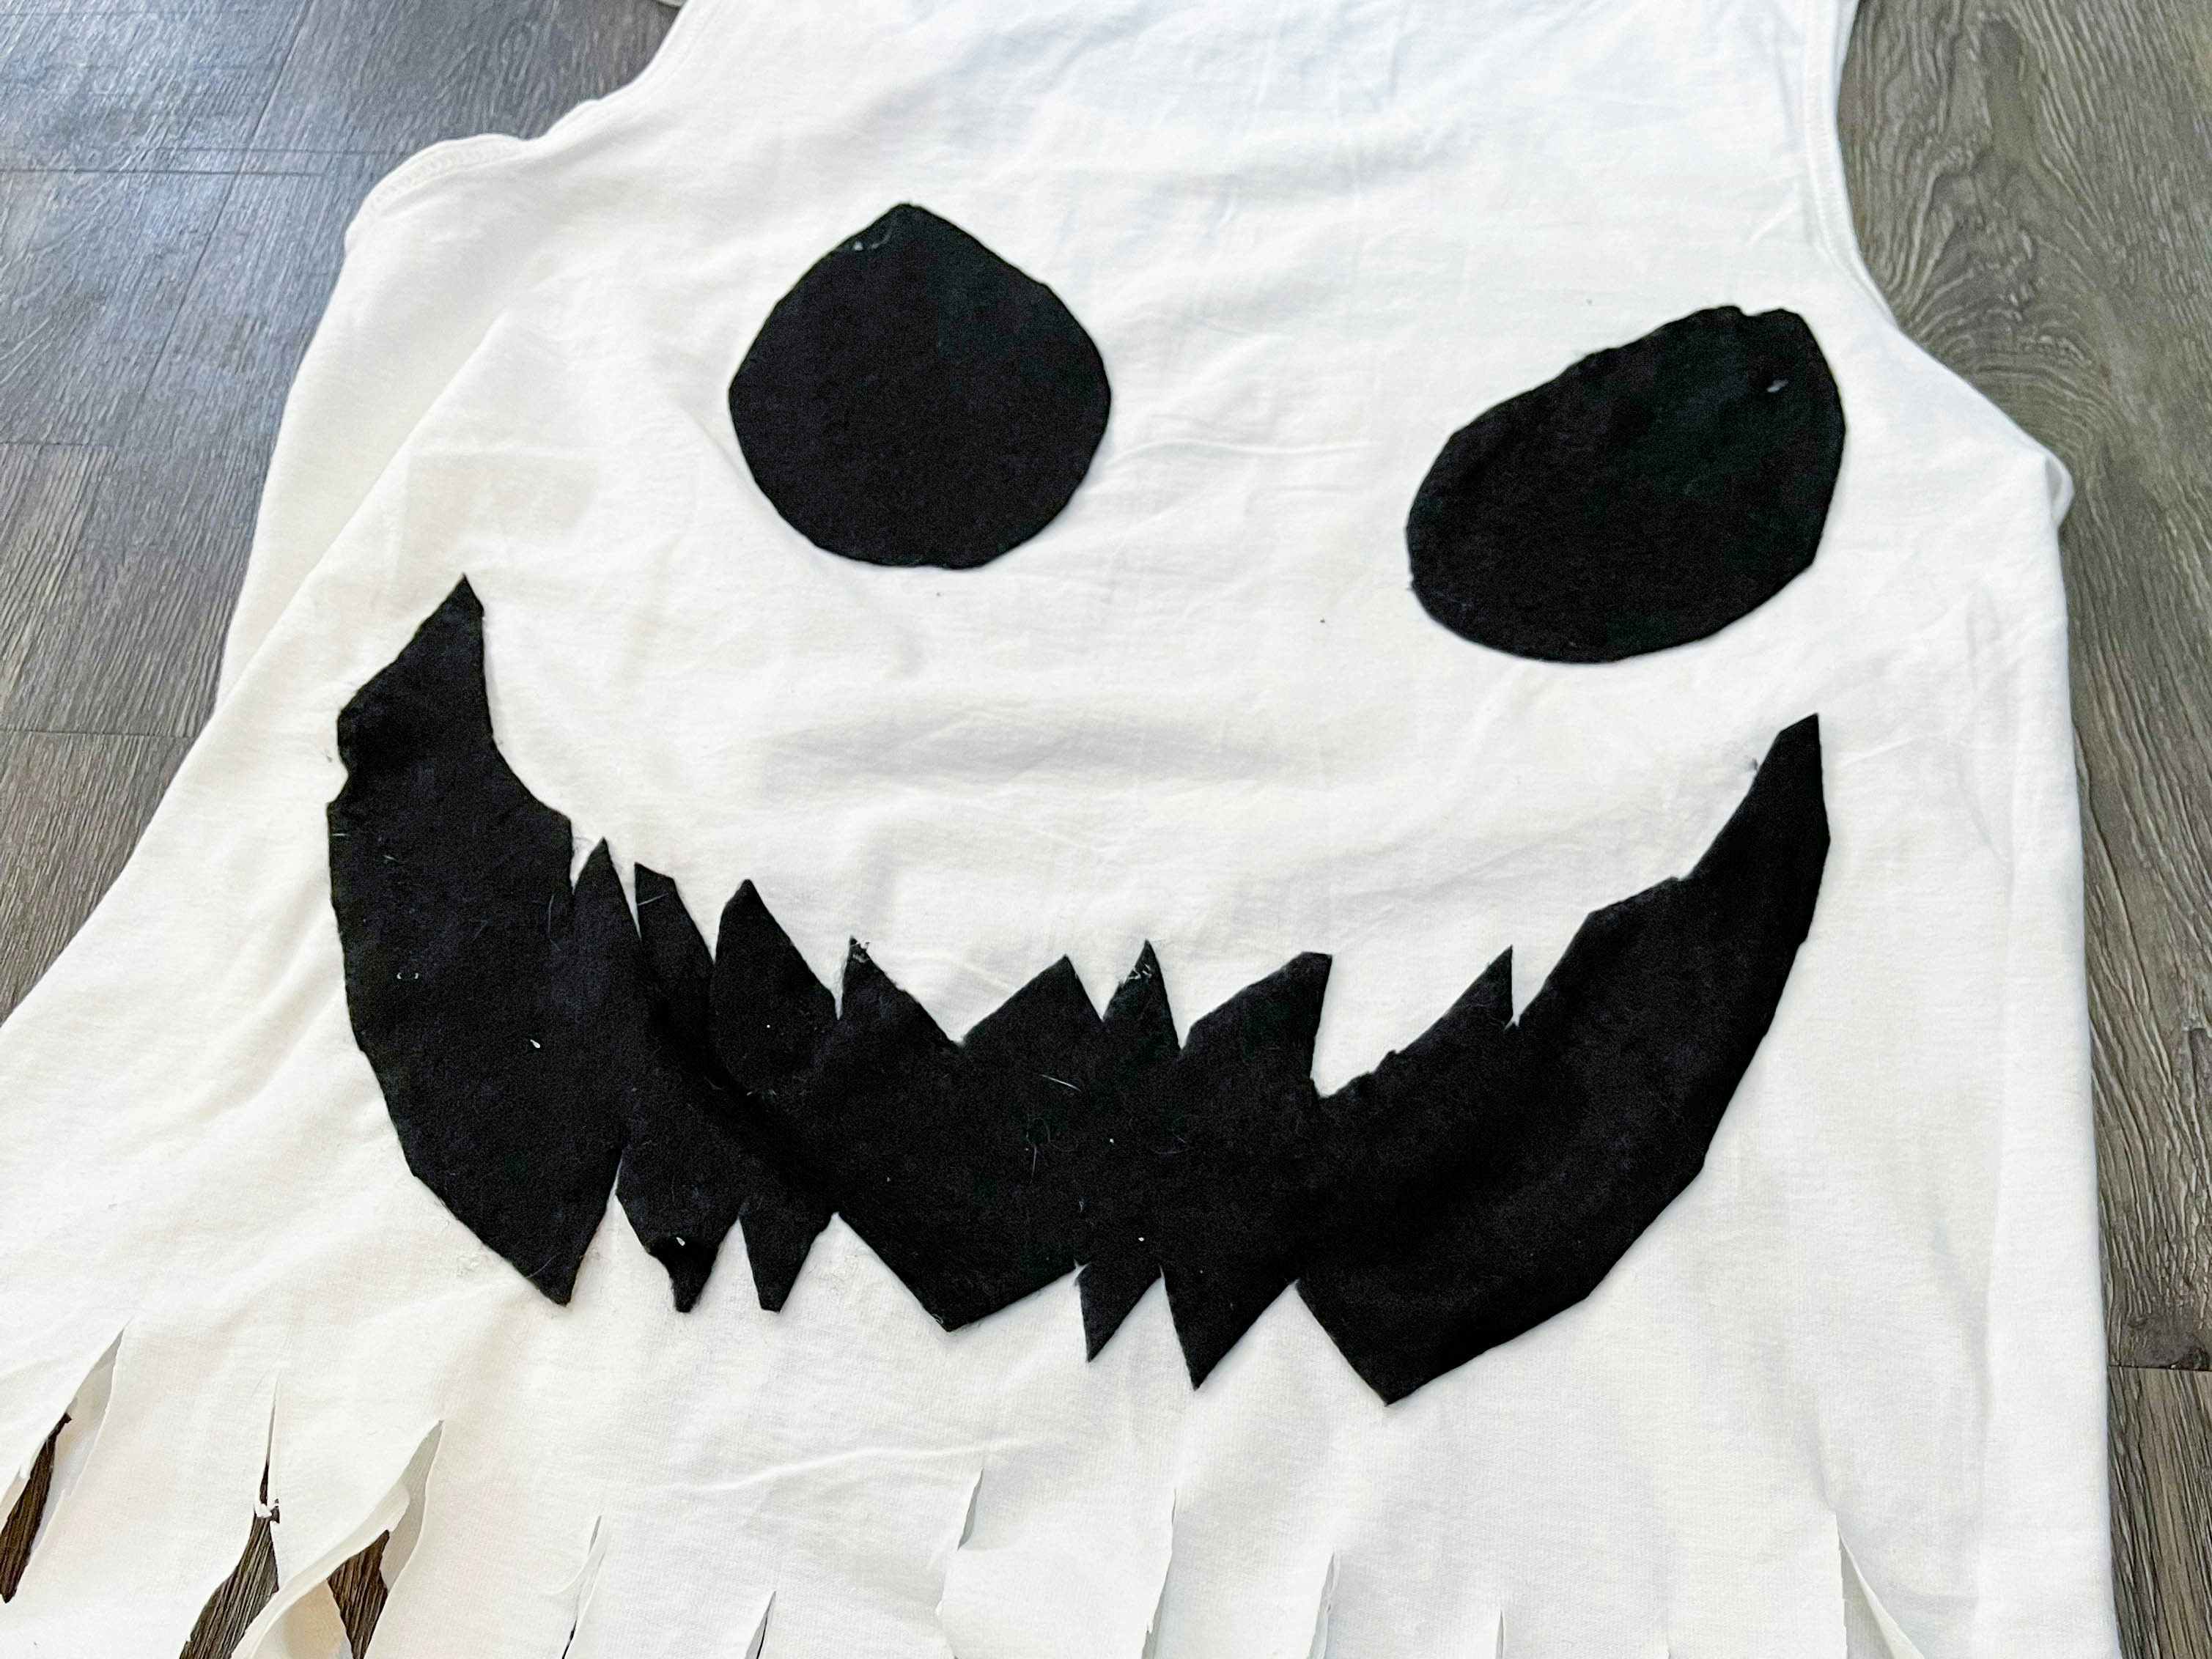 A scary face on a white shirt lying on the floor